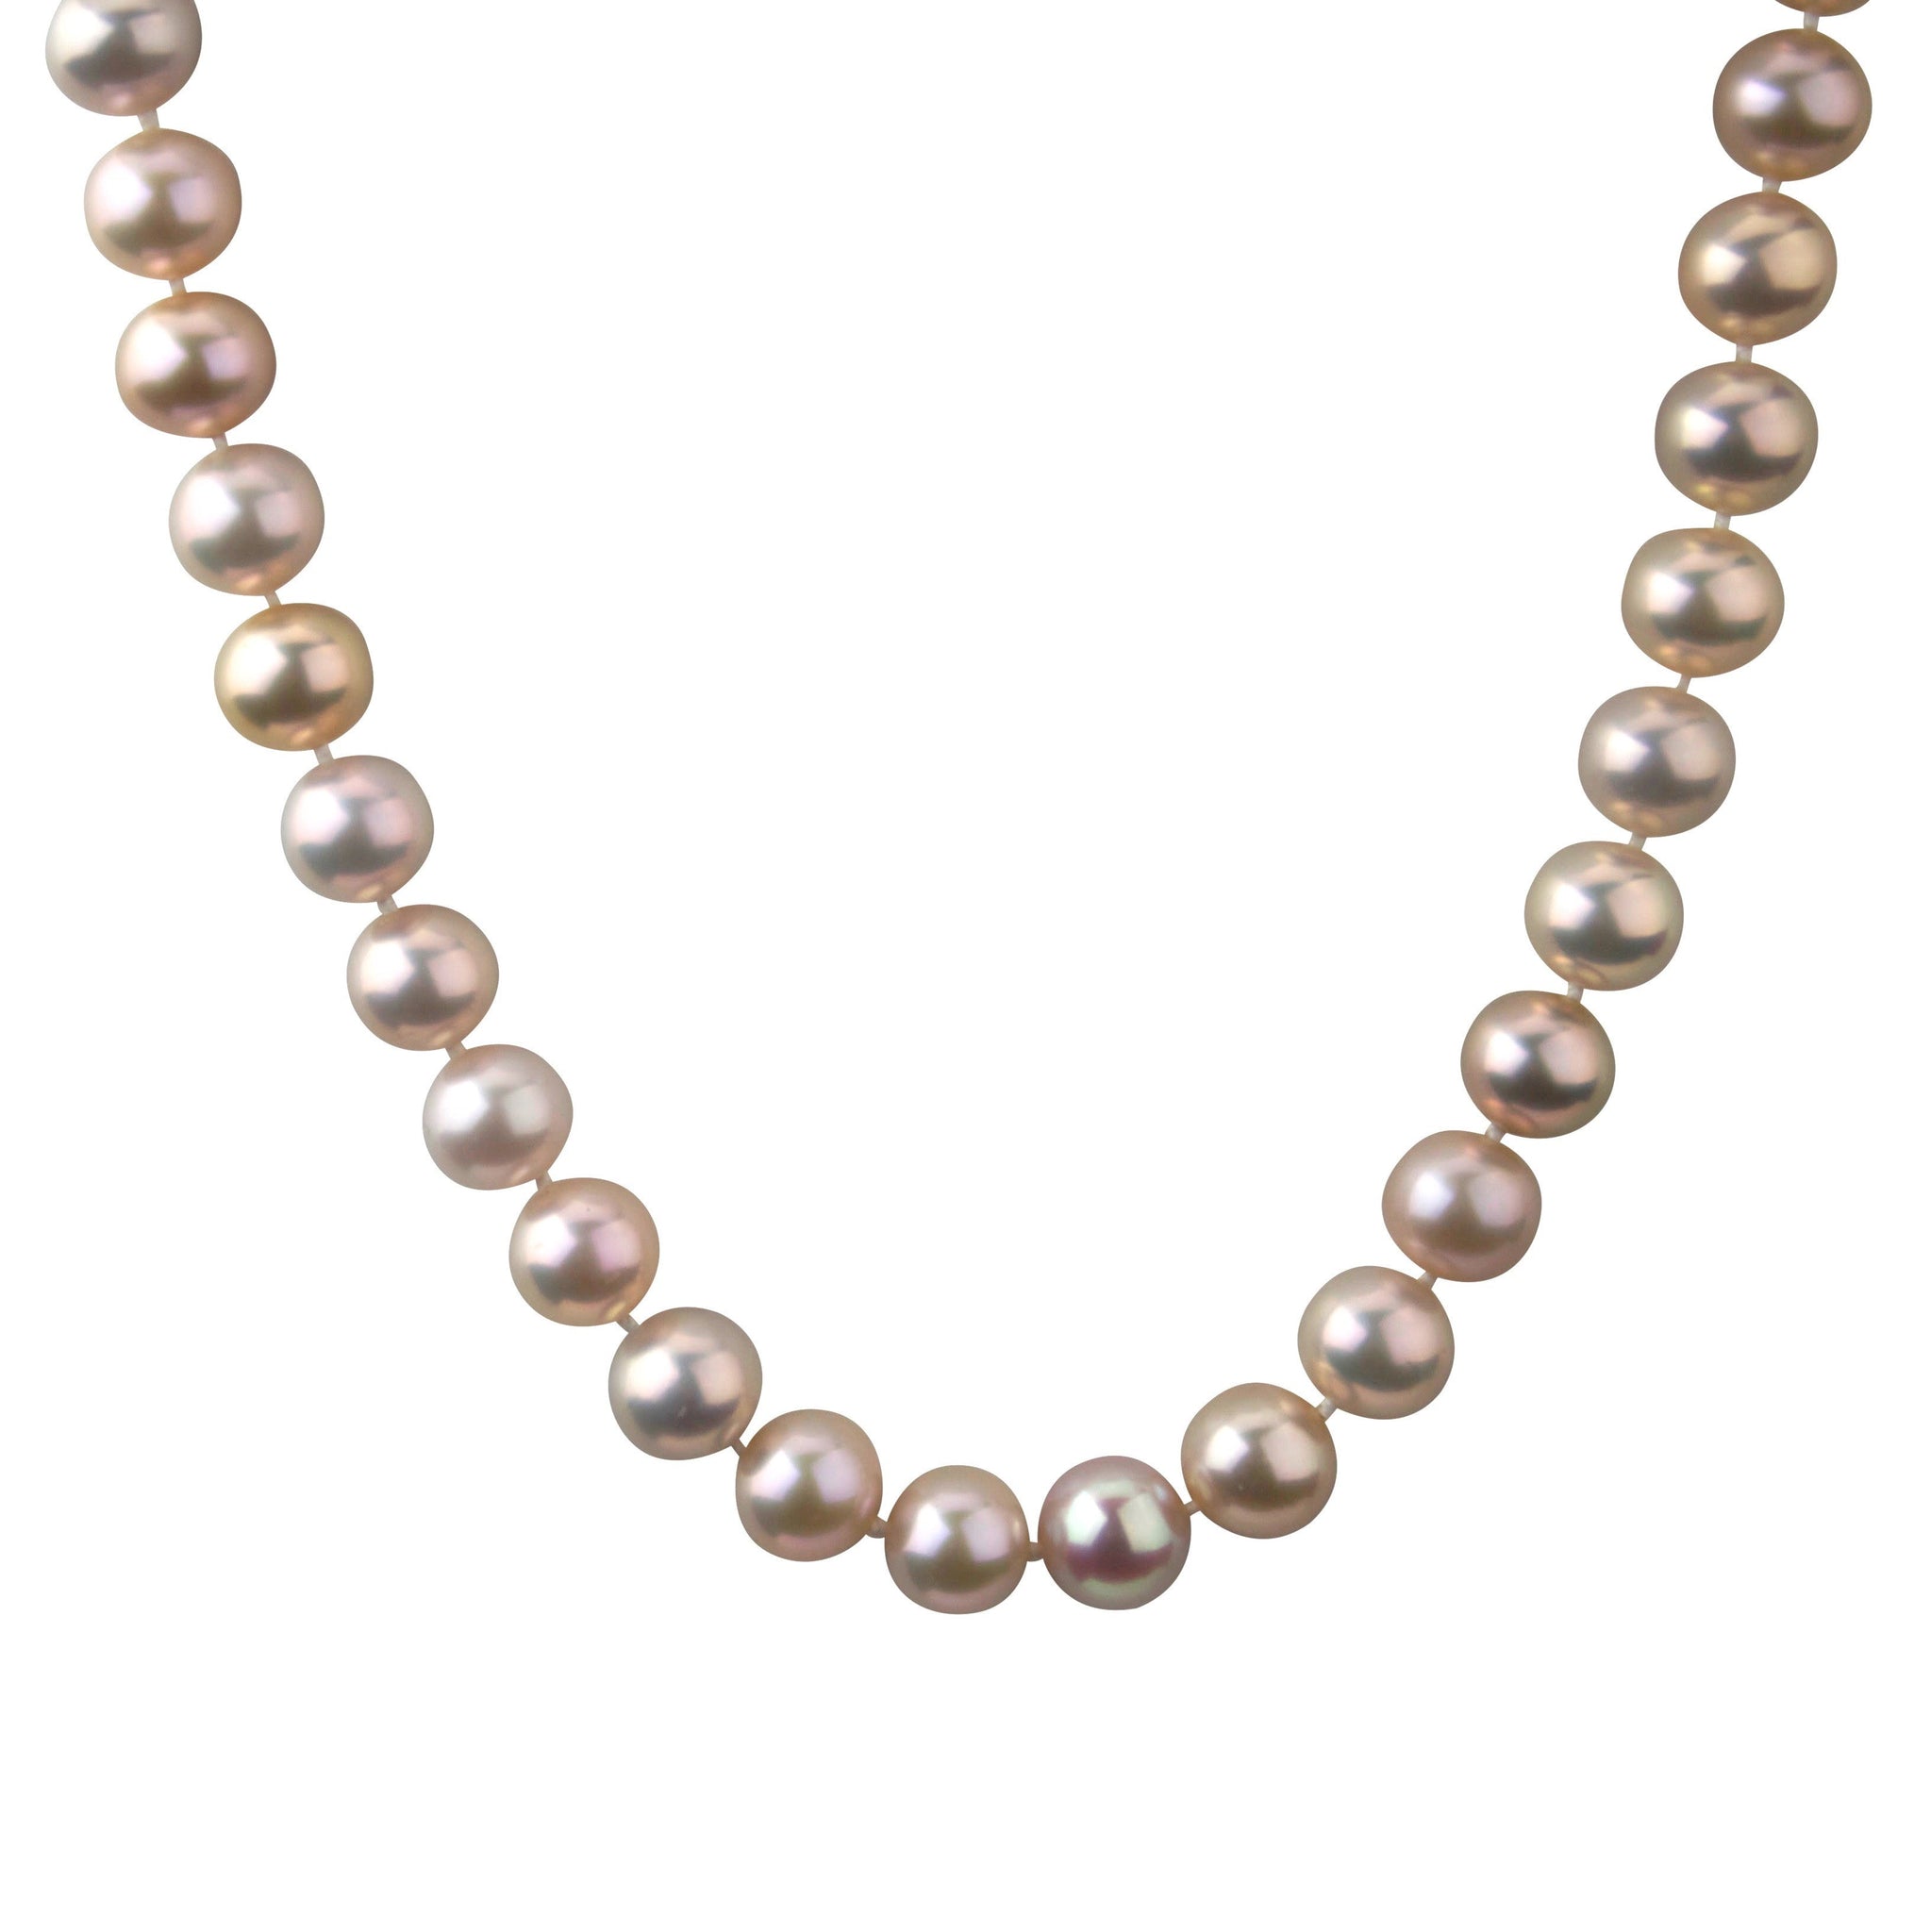 Natural Colored Pink (Blush) Cultured Freshwater Pearl Necklace 8-9mm Jewelry, Necklace, Choker Bourdage Pearl Jewelry    sherri bourdage